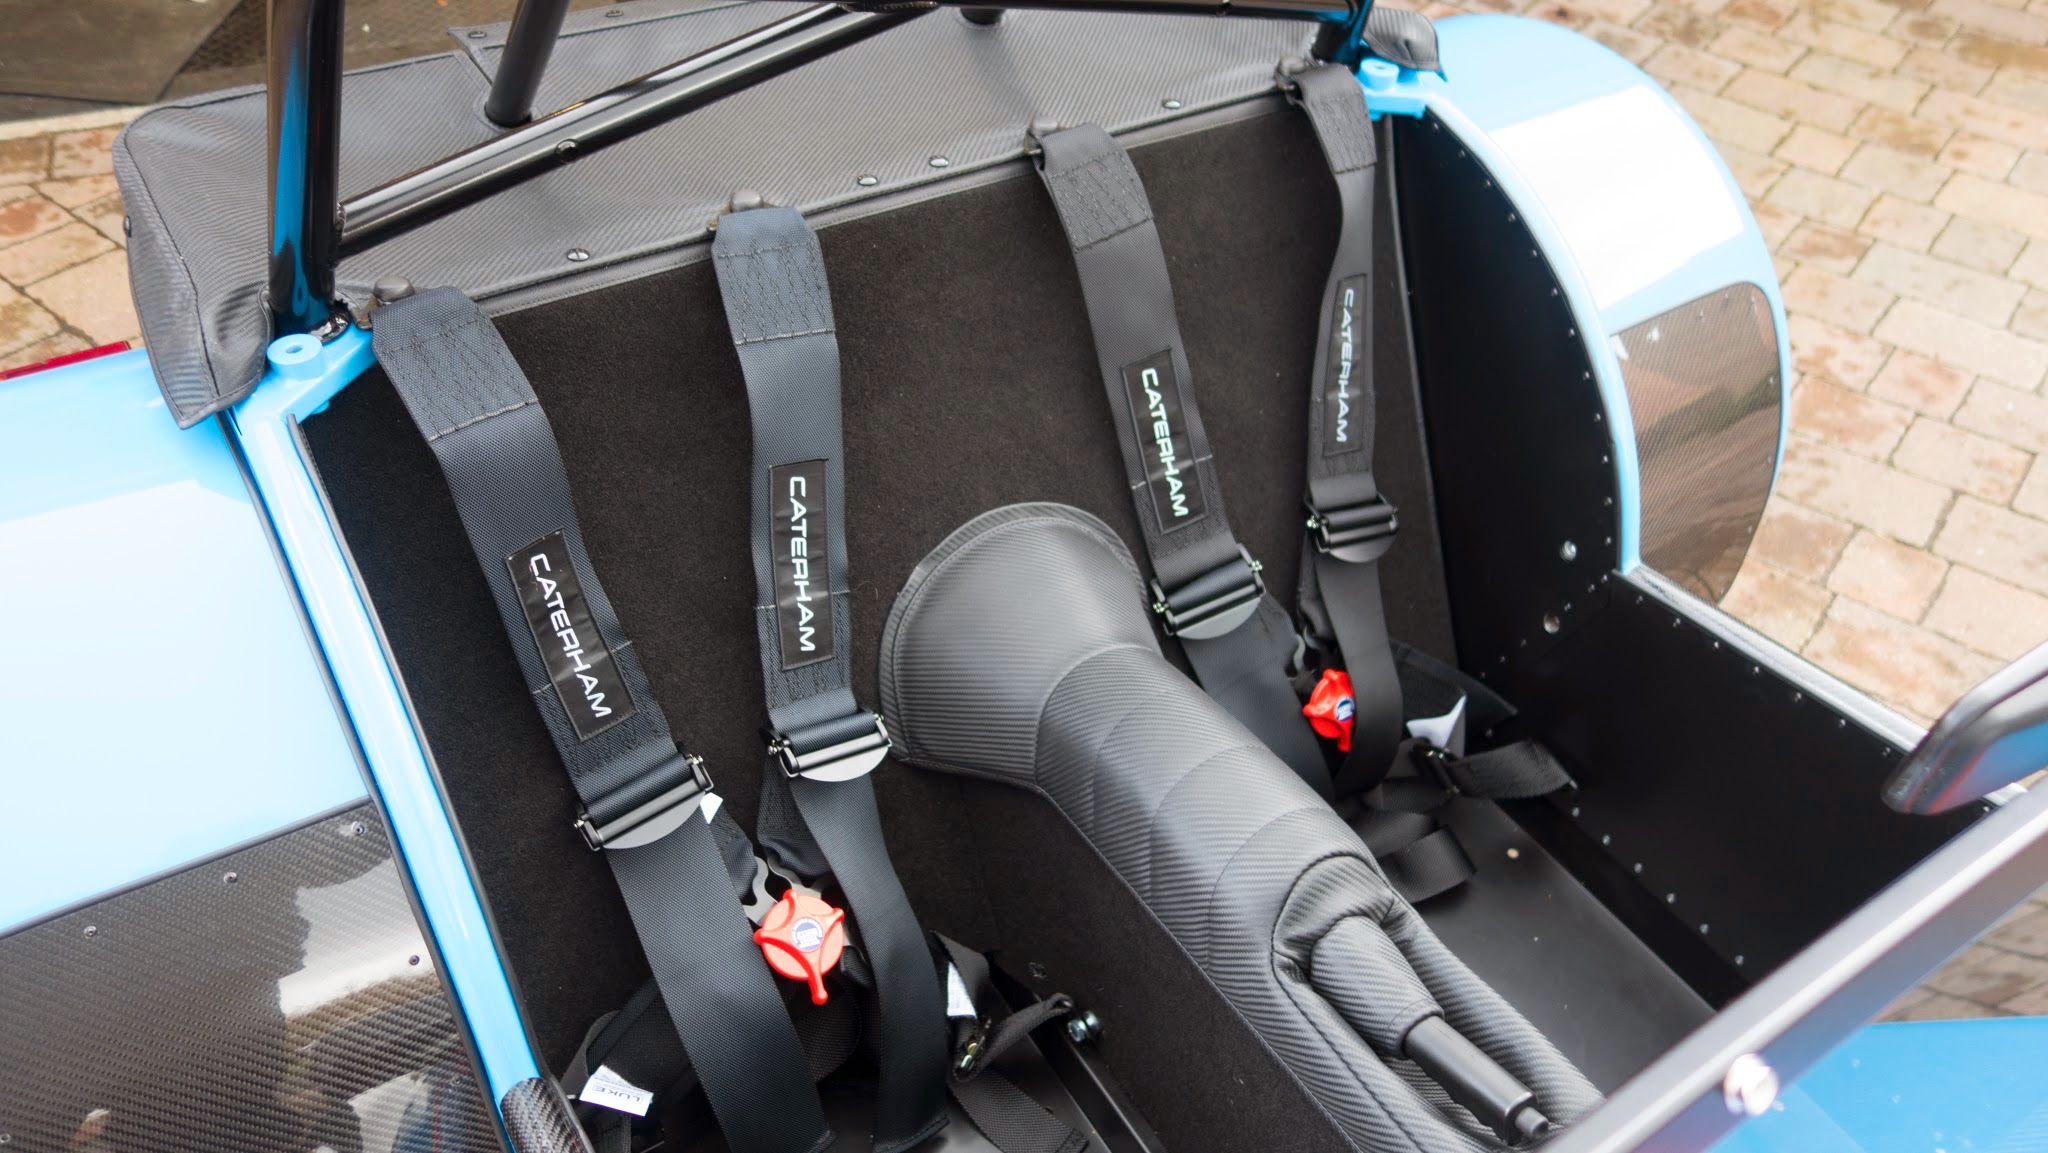 The 620R harnesses, you'll  notice the drivers side ones are a slightly blue colour - so these will be changed.